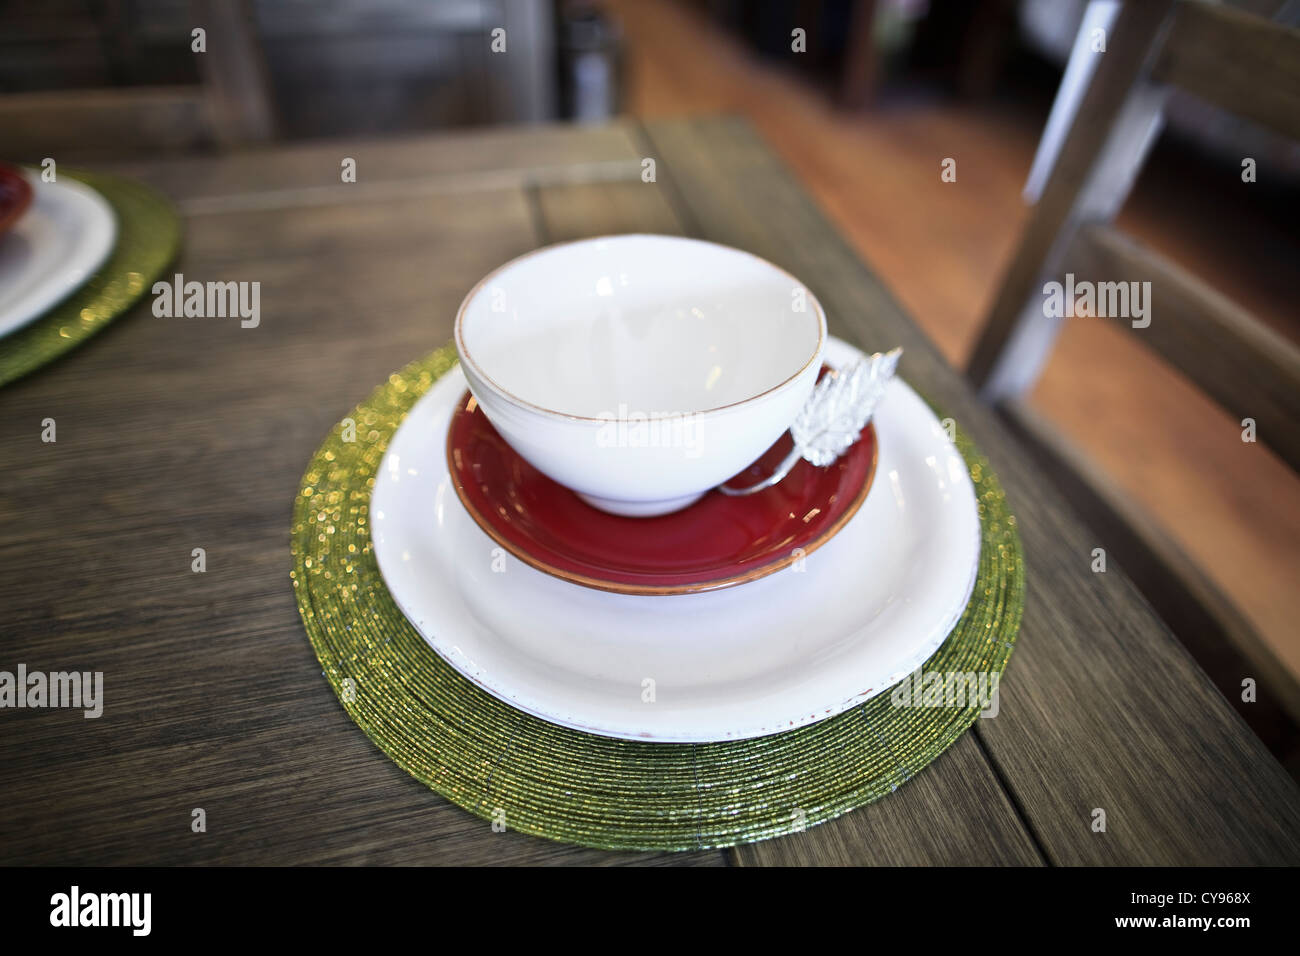 Place setting, dishes on wooden table Stock Photo